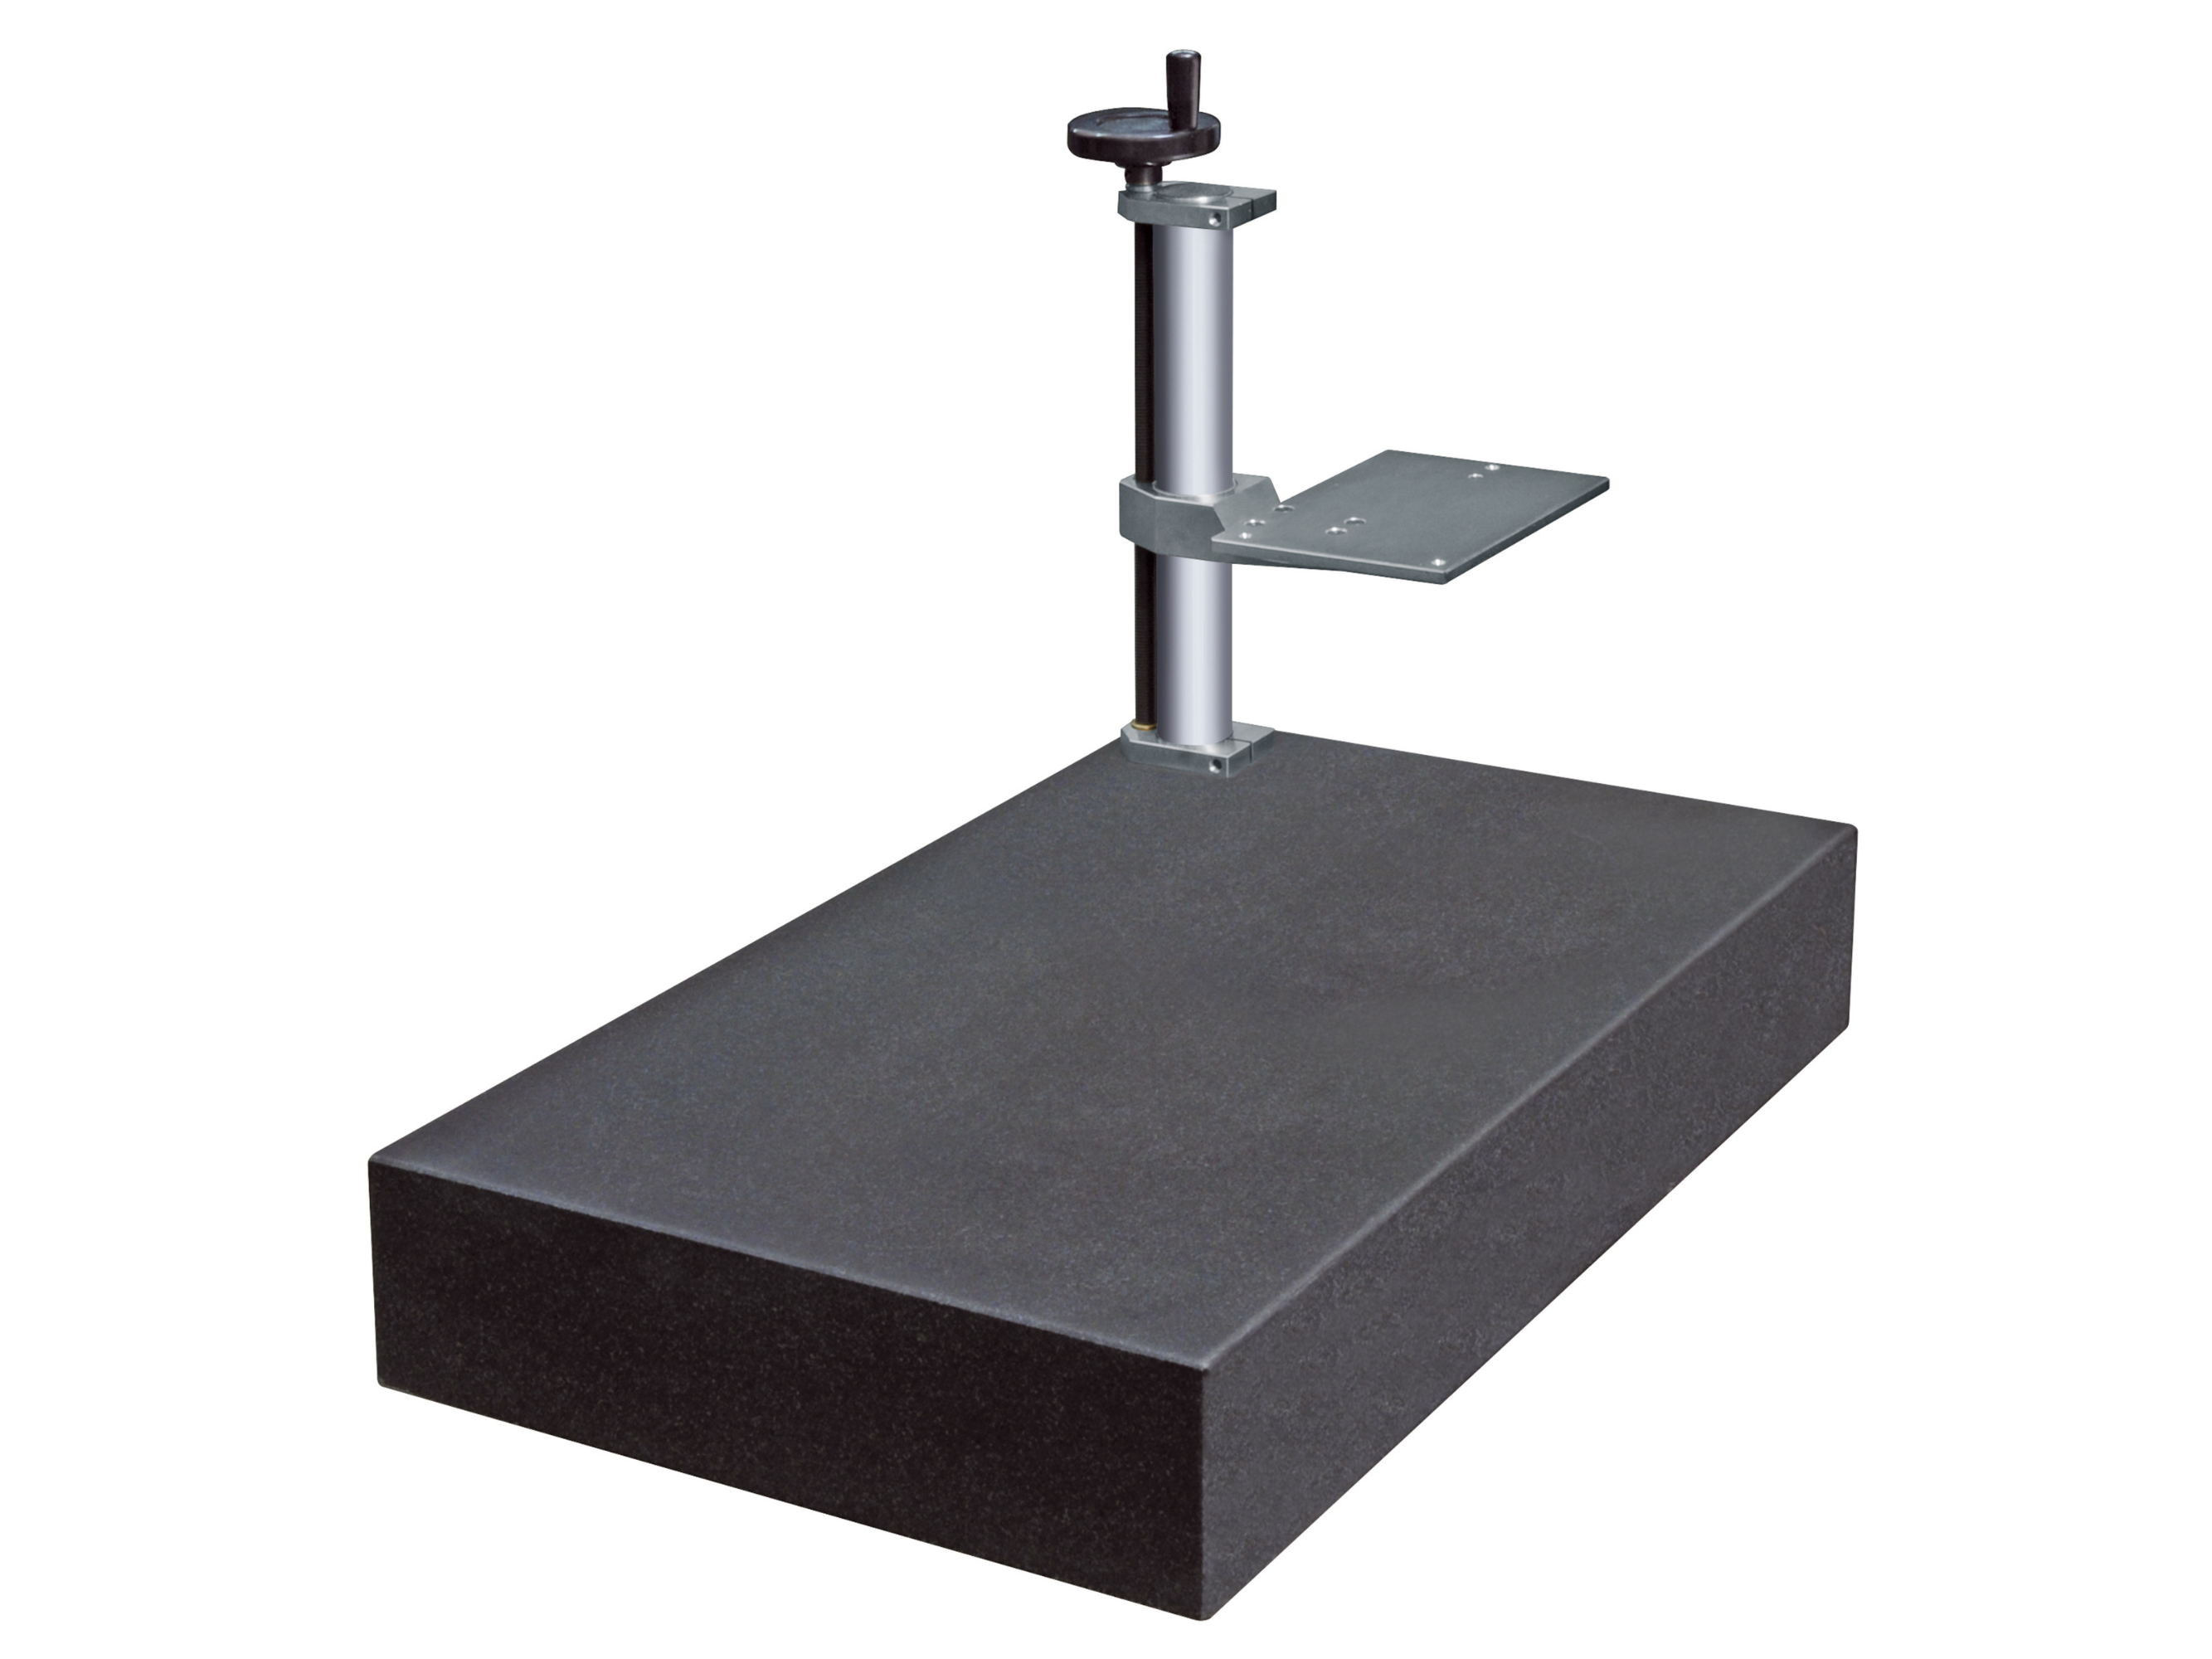 Tesa Rugosurf 90G Support with granite table, 630 x 400 mm 06960055